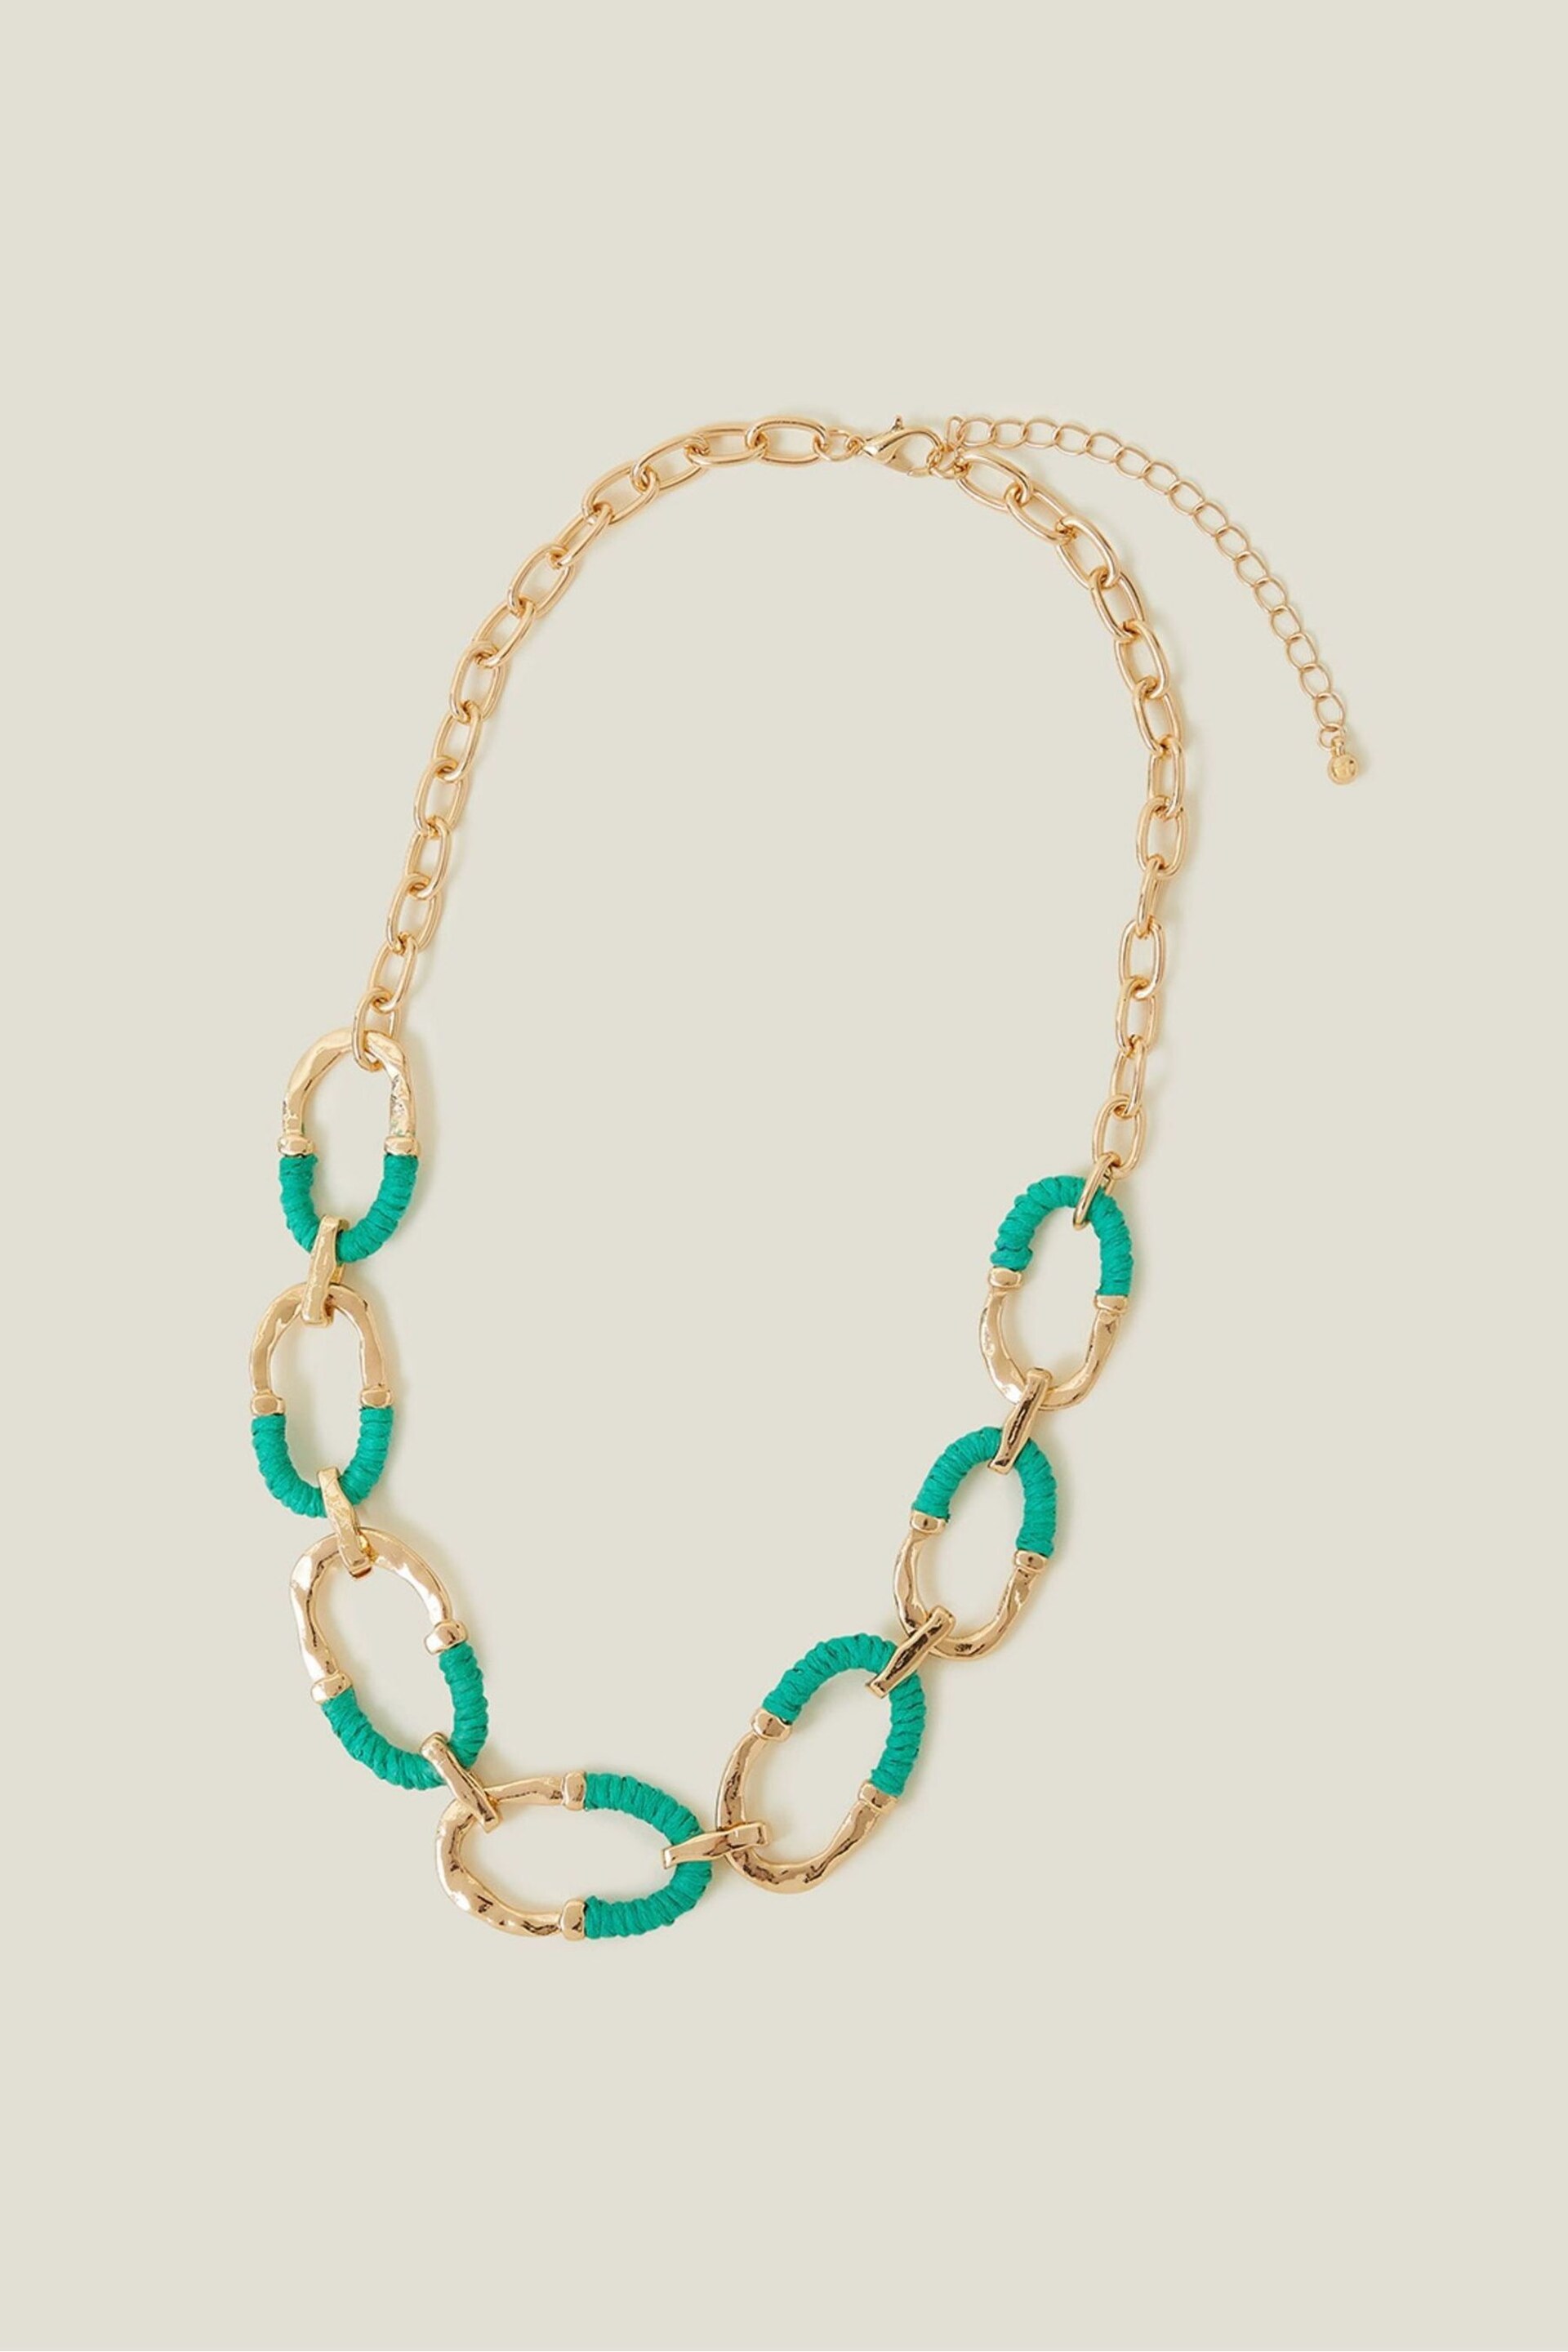 Accessorize Green Wrapped Loop Necklace - Image 2 of 3